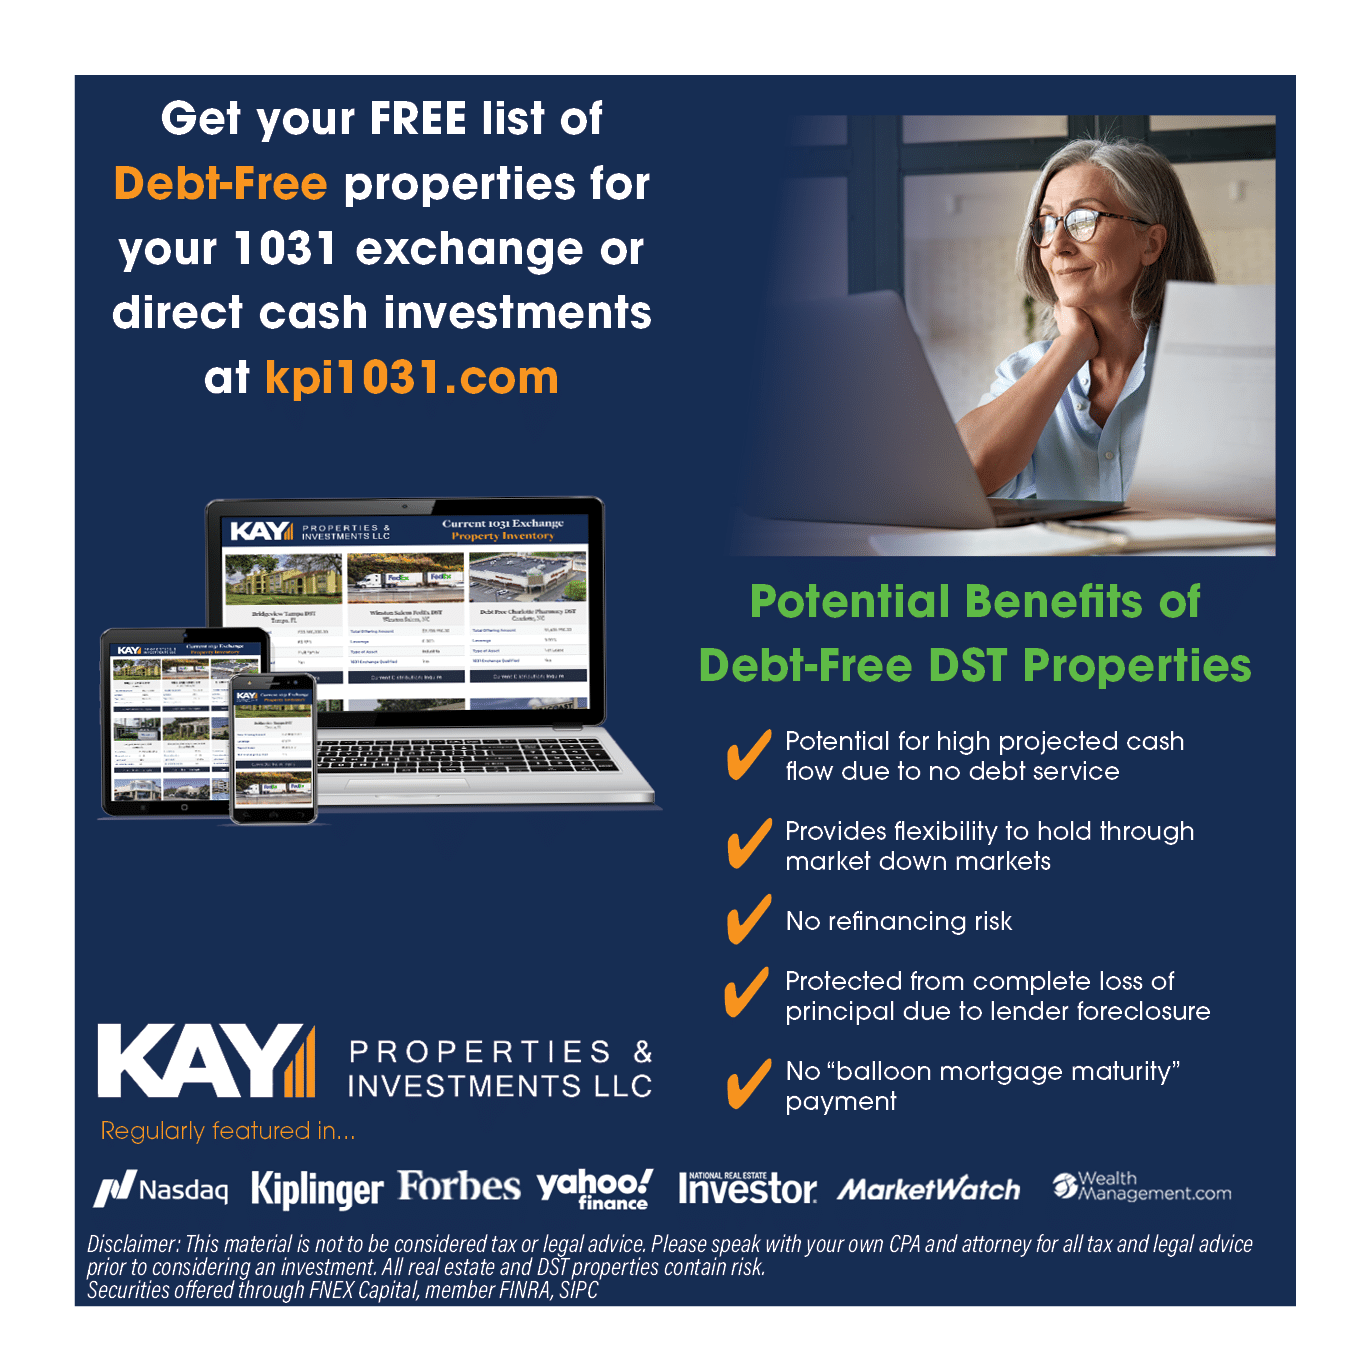 Kay Properties and Investments is a leader in providing investors with debt-free real estate investment options for their 1031 exchange and direct cash investments.